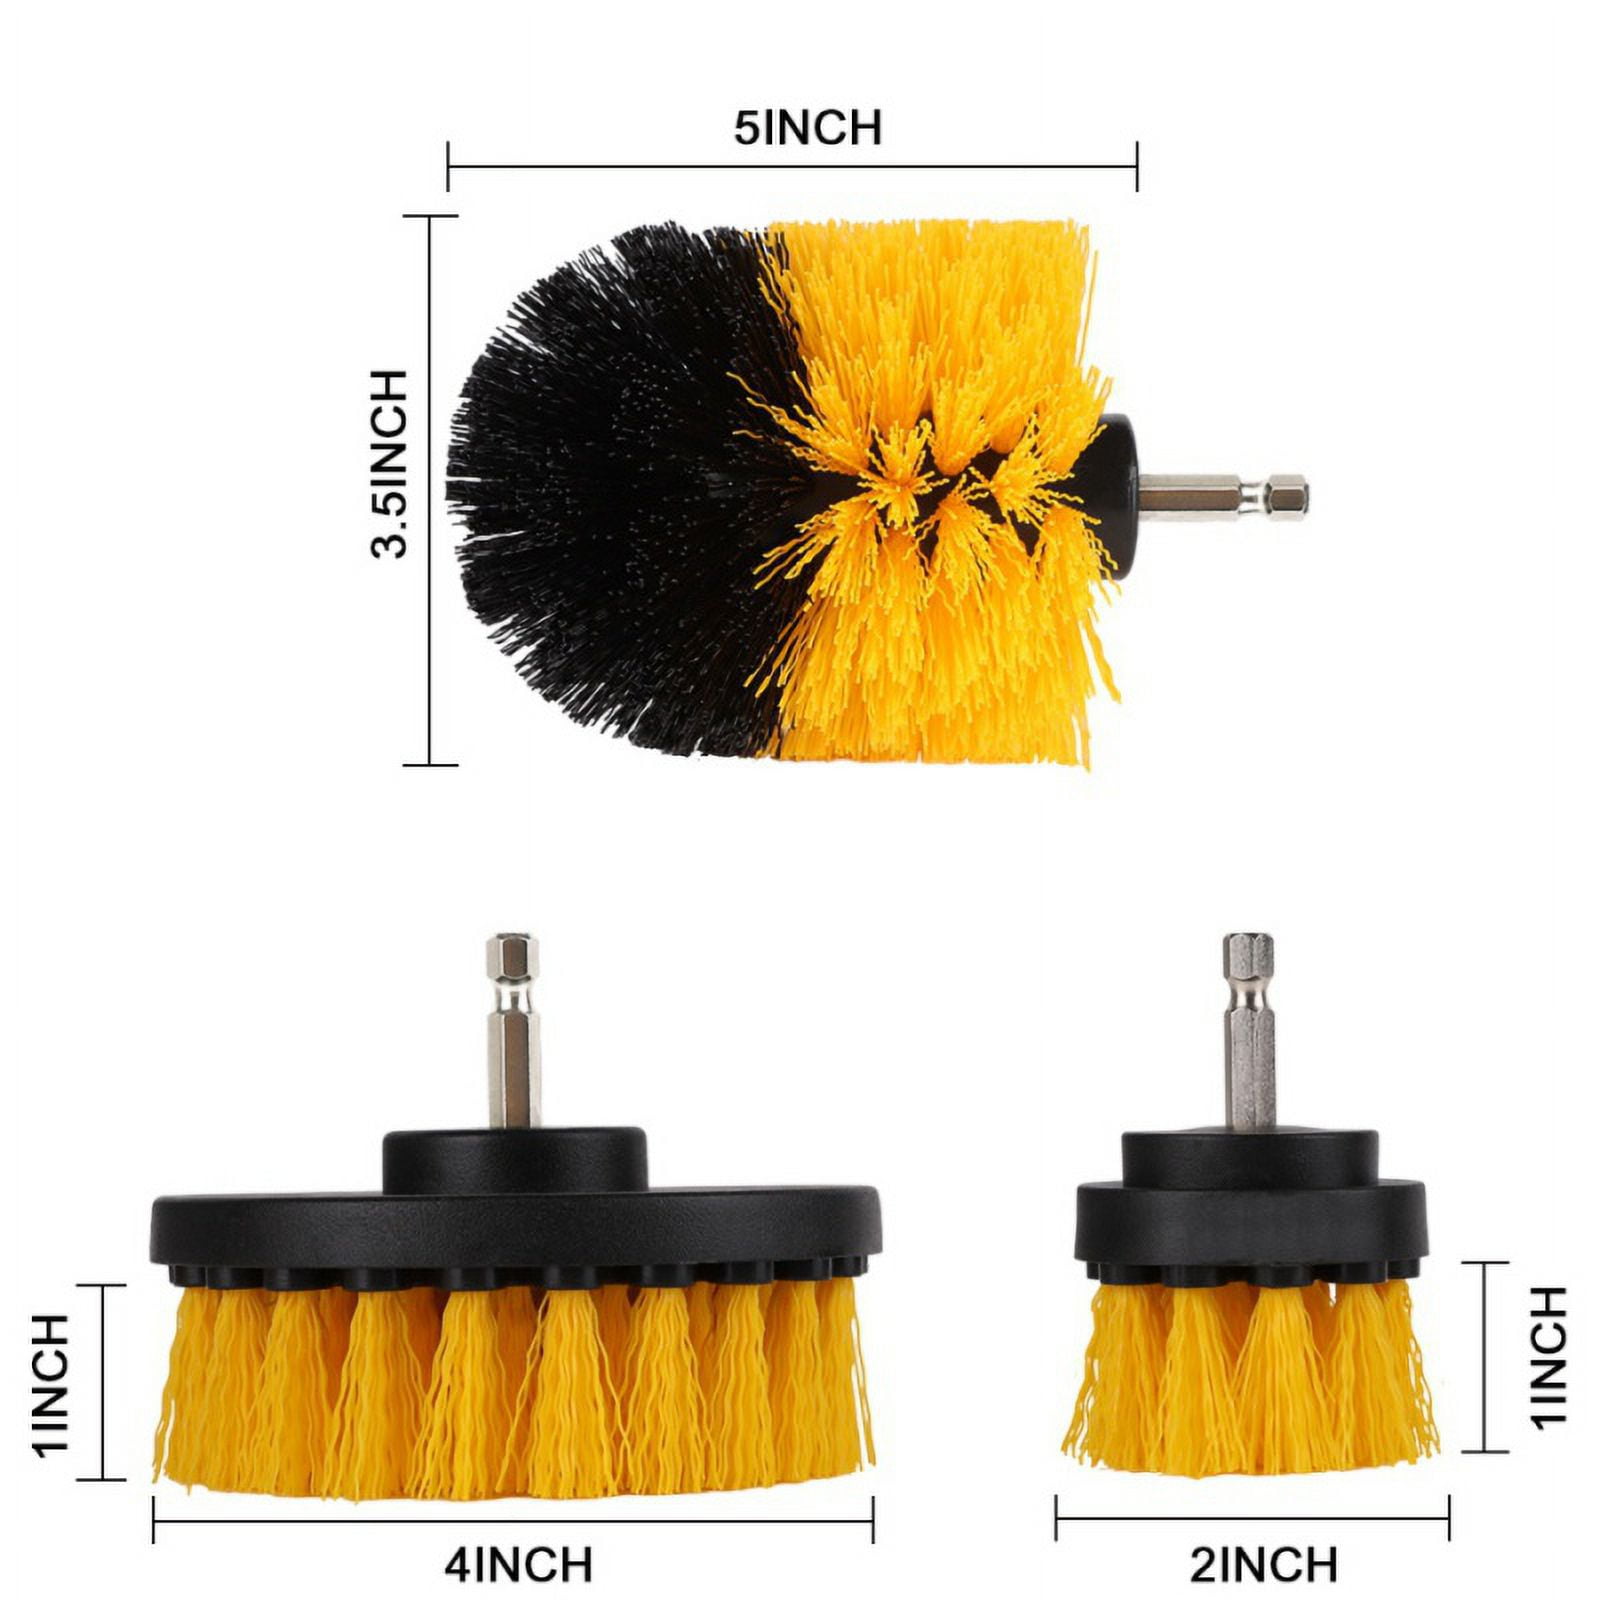 9/19/34/49pcs Drill Brush Attachment Set, Power Scrubber Brush with 1pcs  1/4in Extend Long Attachment, Drill Scrub Brush for Cleaning Showers, Tubs,  Bathroom, Tile, Grout, Carpet (9pcs) - Yahoo Shopping